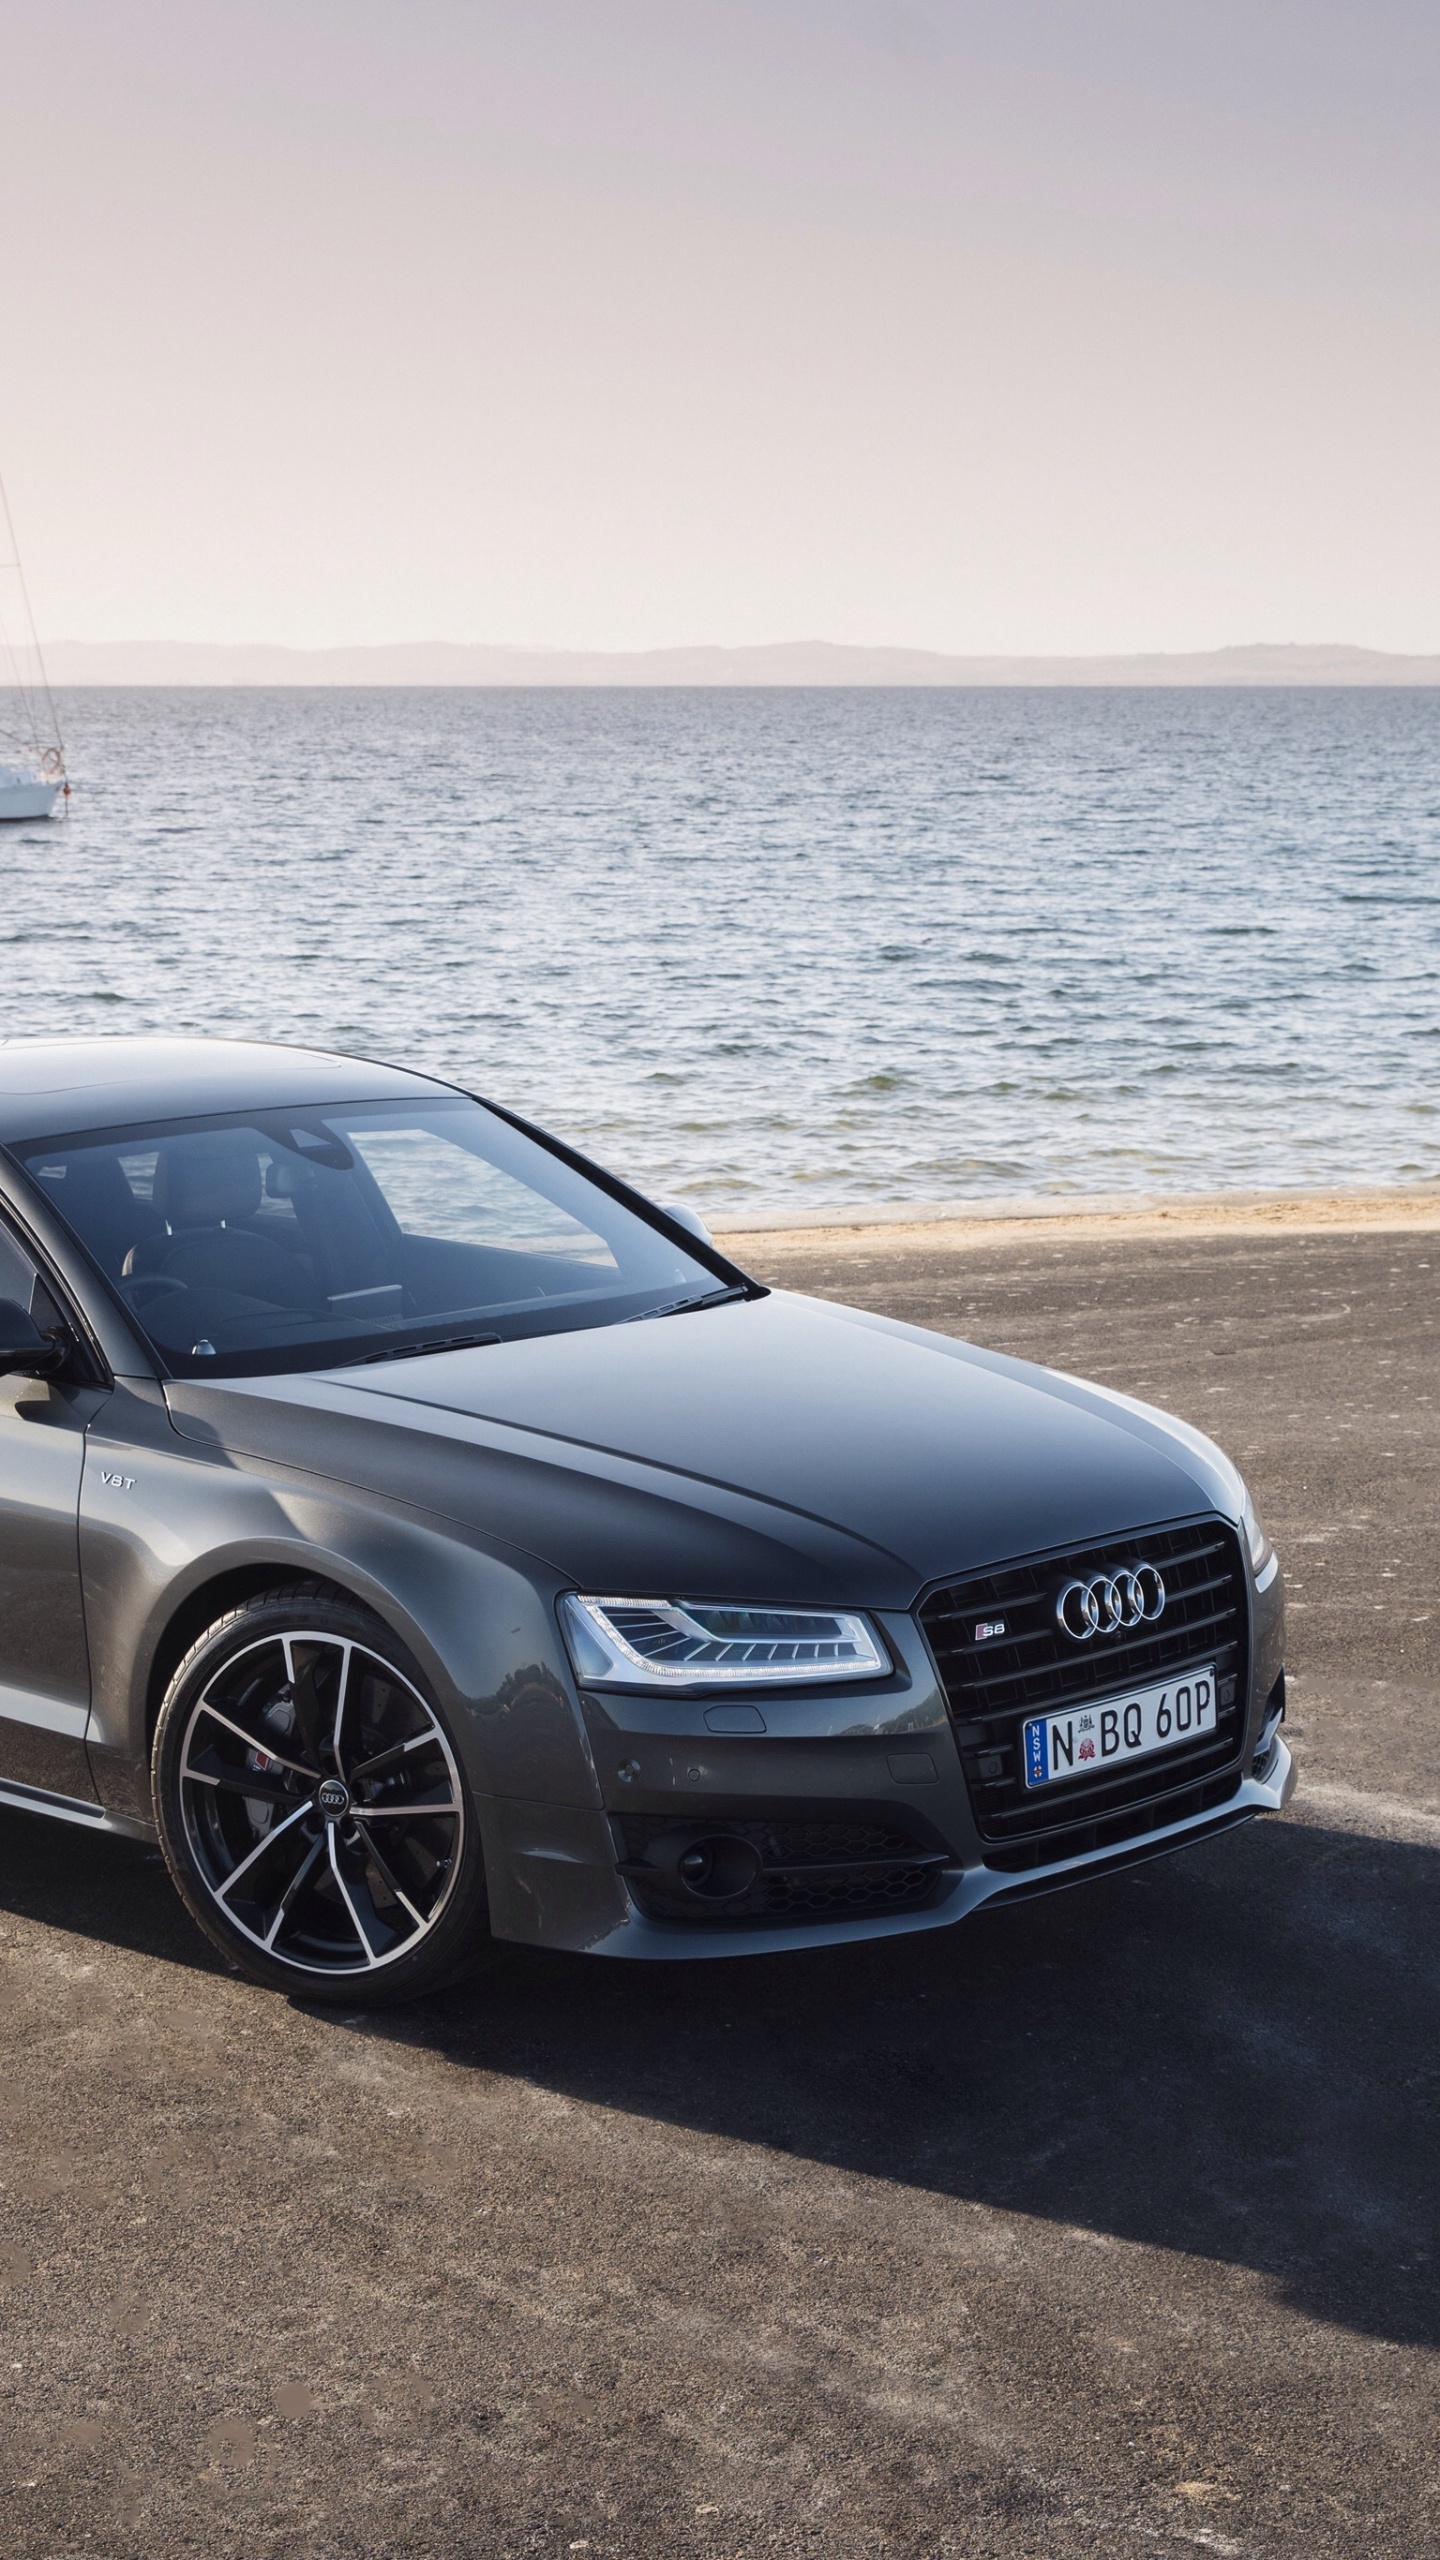 Black Audi a 4 on Beach During Daytime. Wallpaper in 1440x2560 Resolution